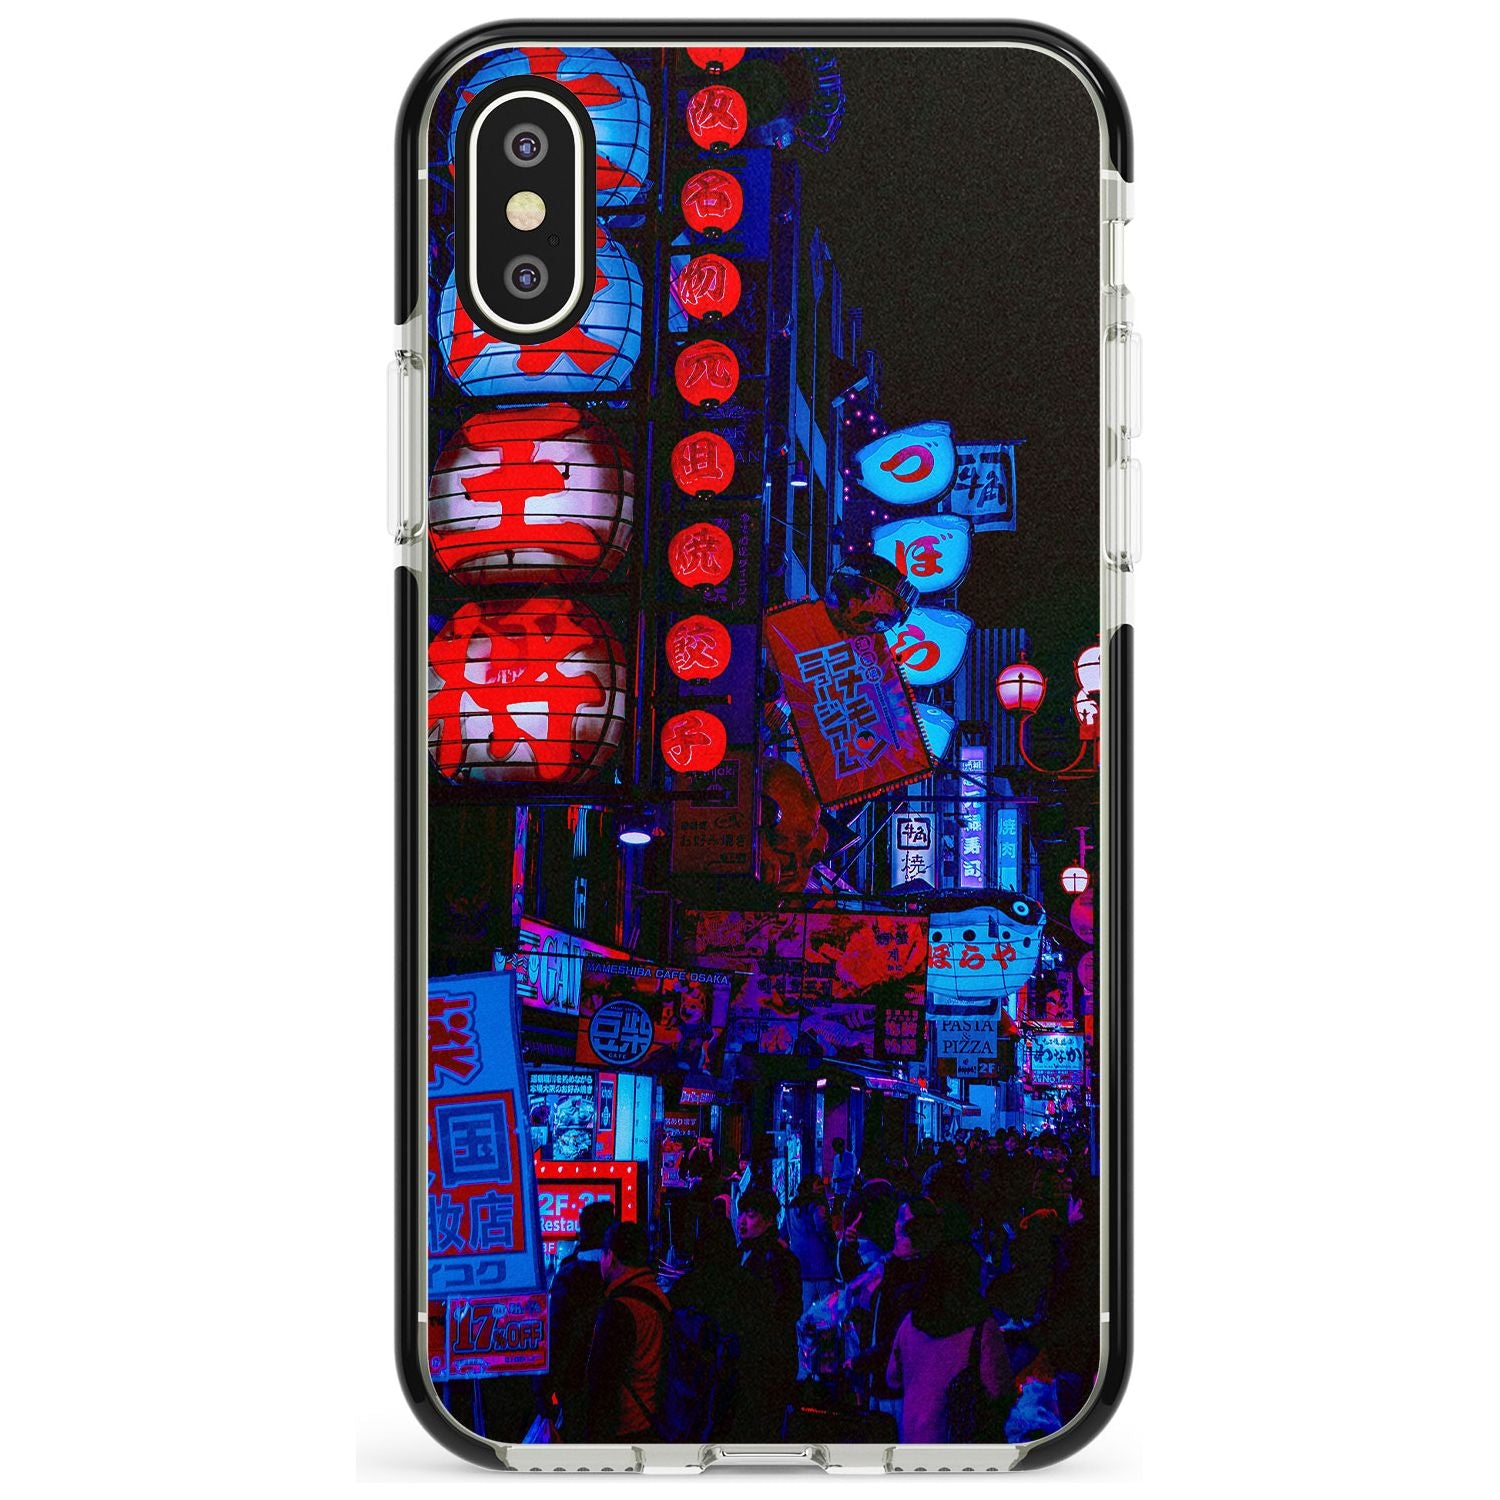 Red & Turquoise - Neon Cities Photographs Black Impact Phone Case for iPhone X XS Max XR